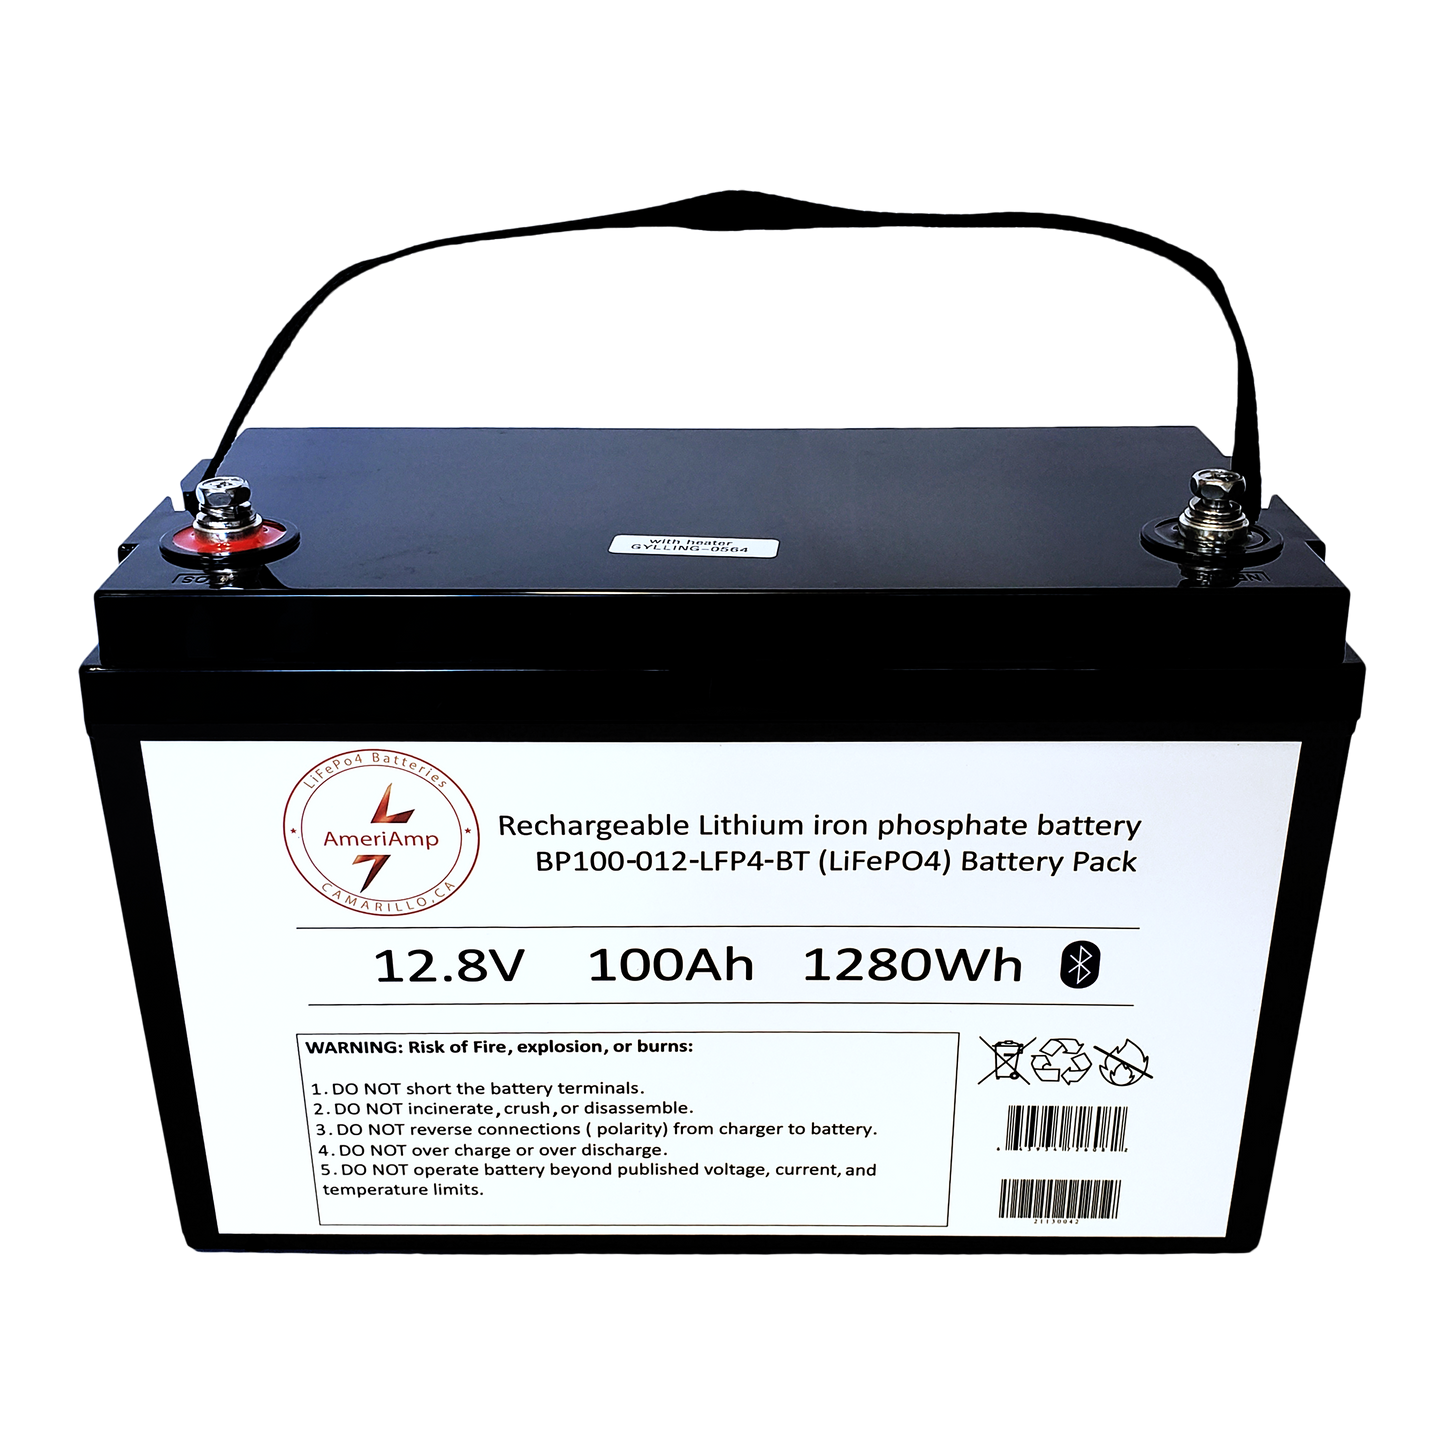 AmeriAmp Lithium Ion Phosphate Battery with Bluetooth Monitoring – Ameriamp